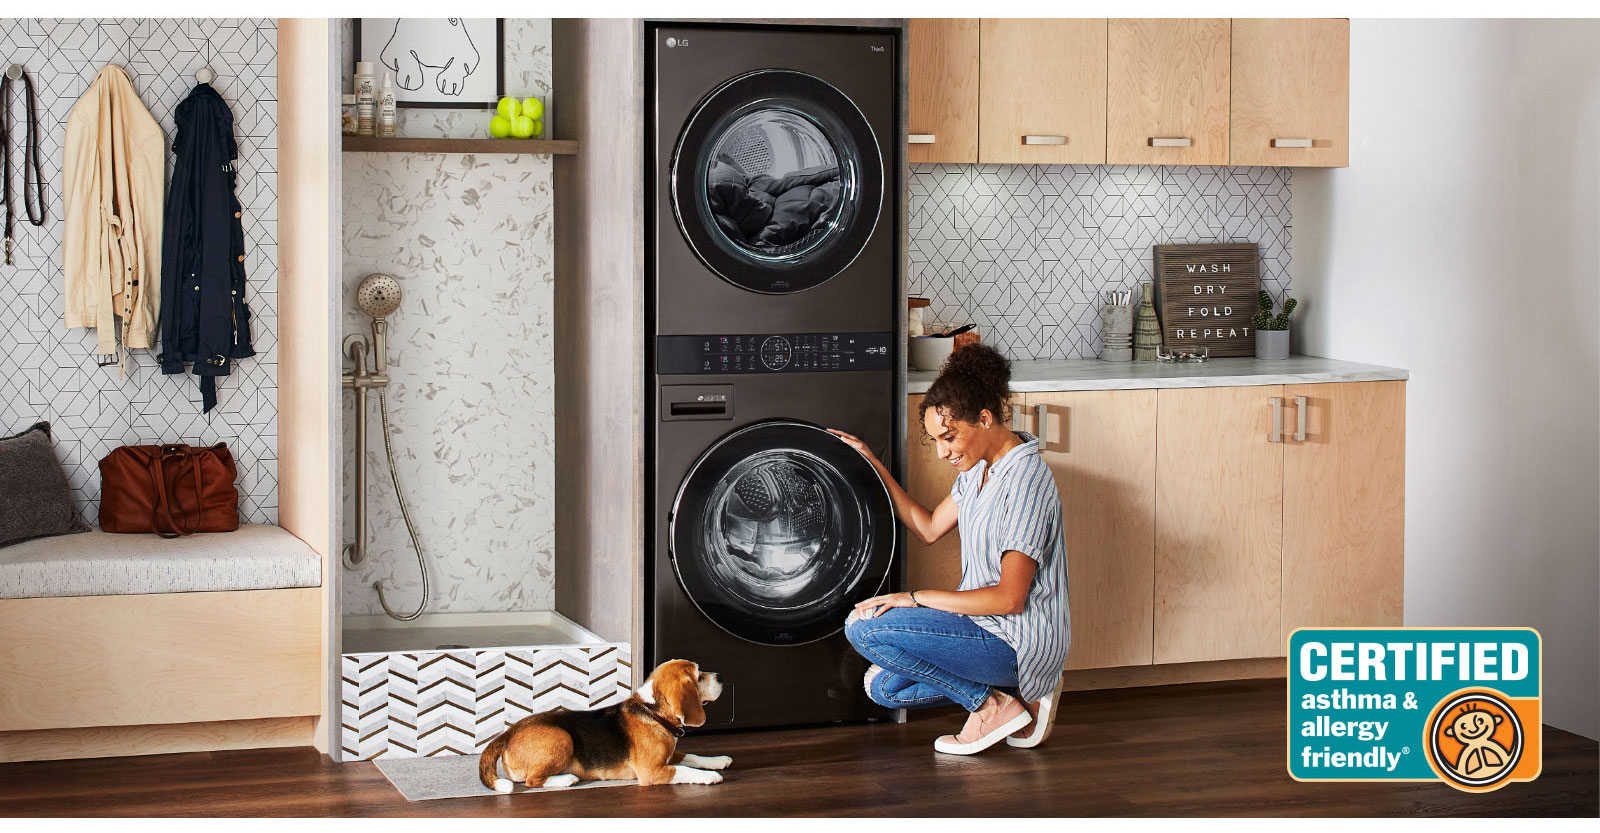 LG Allergiene™ wash cycle is certified asthma & allergy friendly